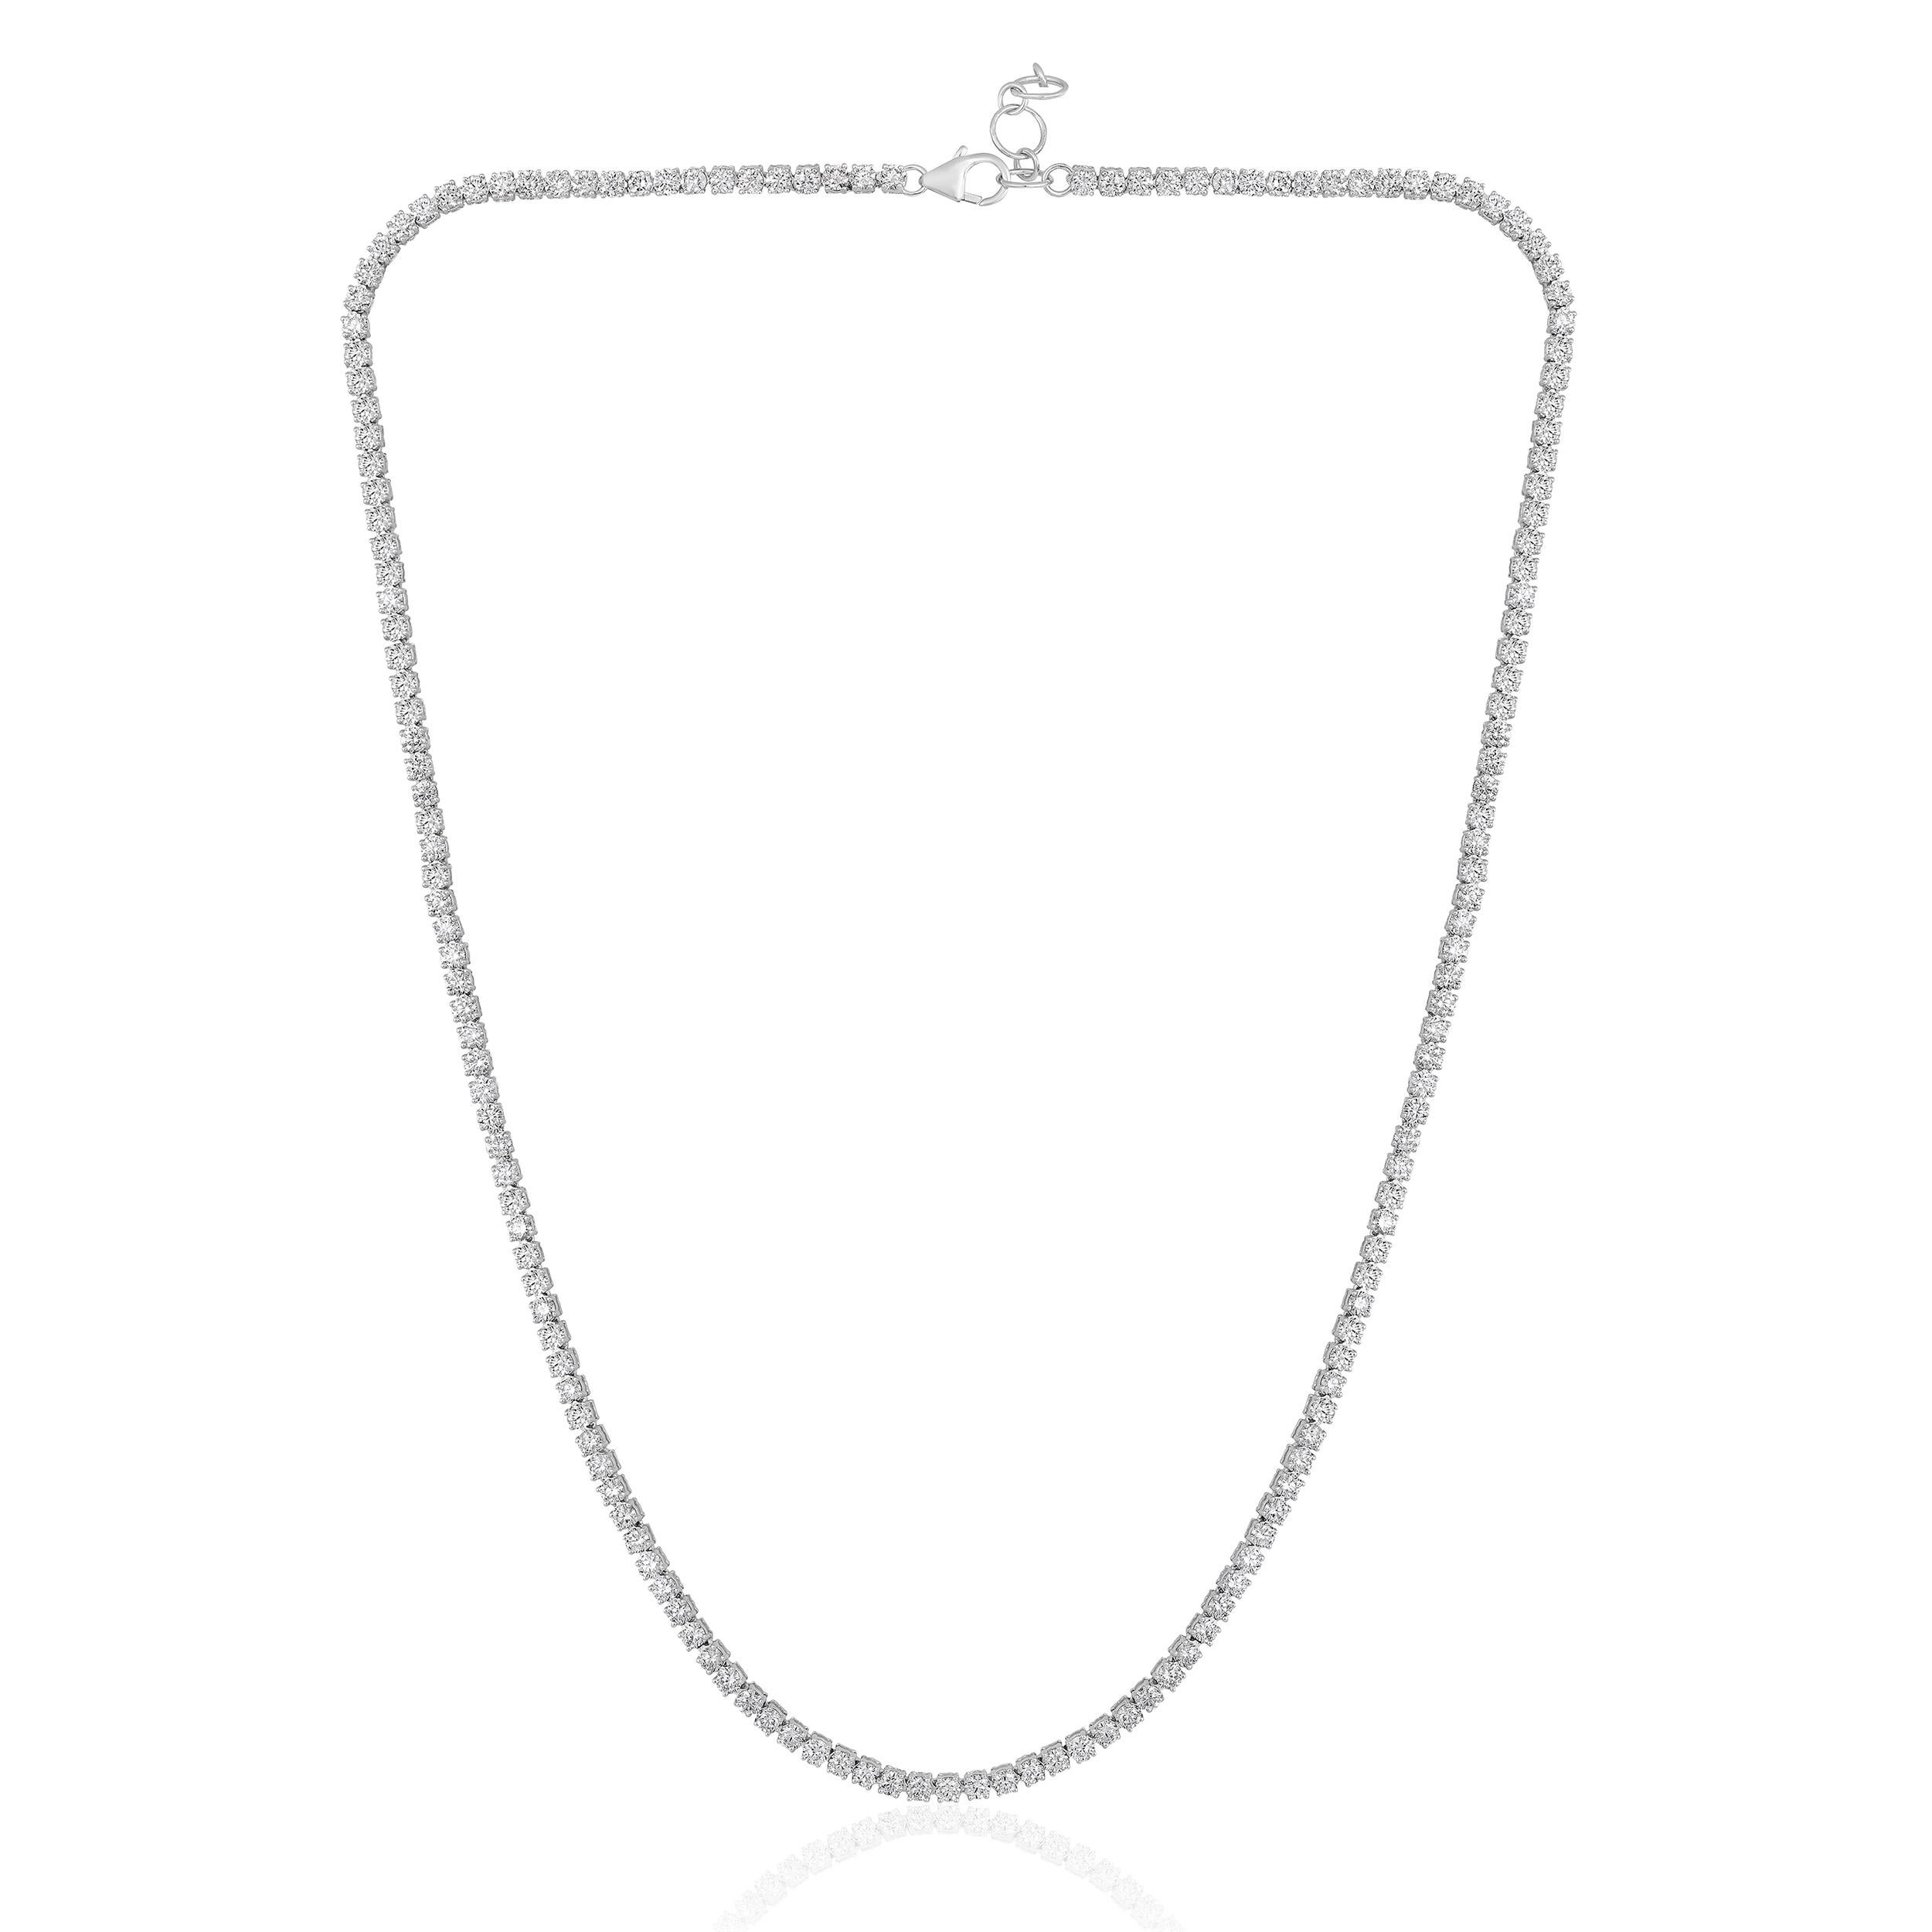 Crafted in 12.23 grams of 14K White Gold, the necklace contains 163 stones of Round Diamonds with a total of 7.13 carat in F-G color and VS-SI carat. The necklace length is 18 inches.
This jewelry piece will be expertly crafted by our skilled